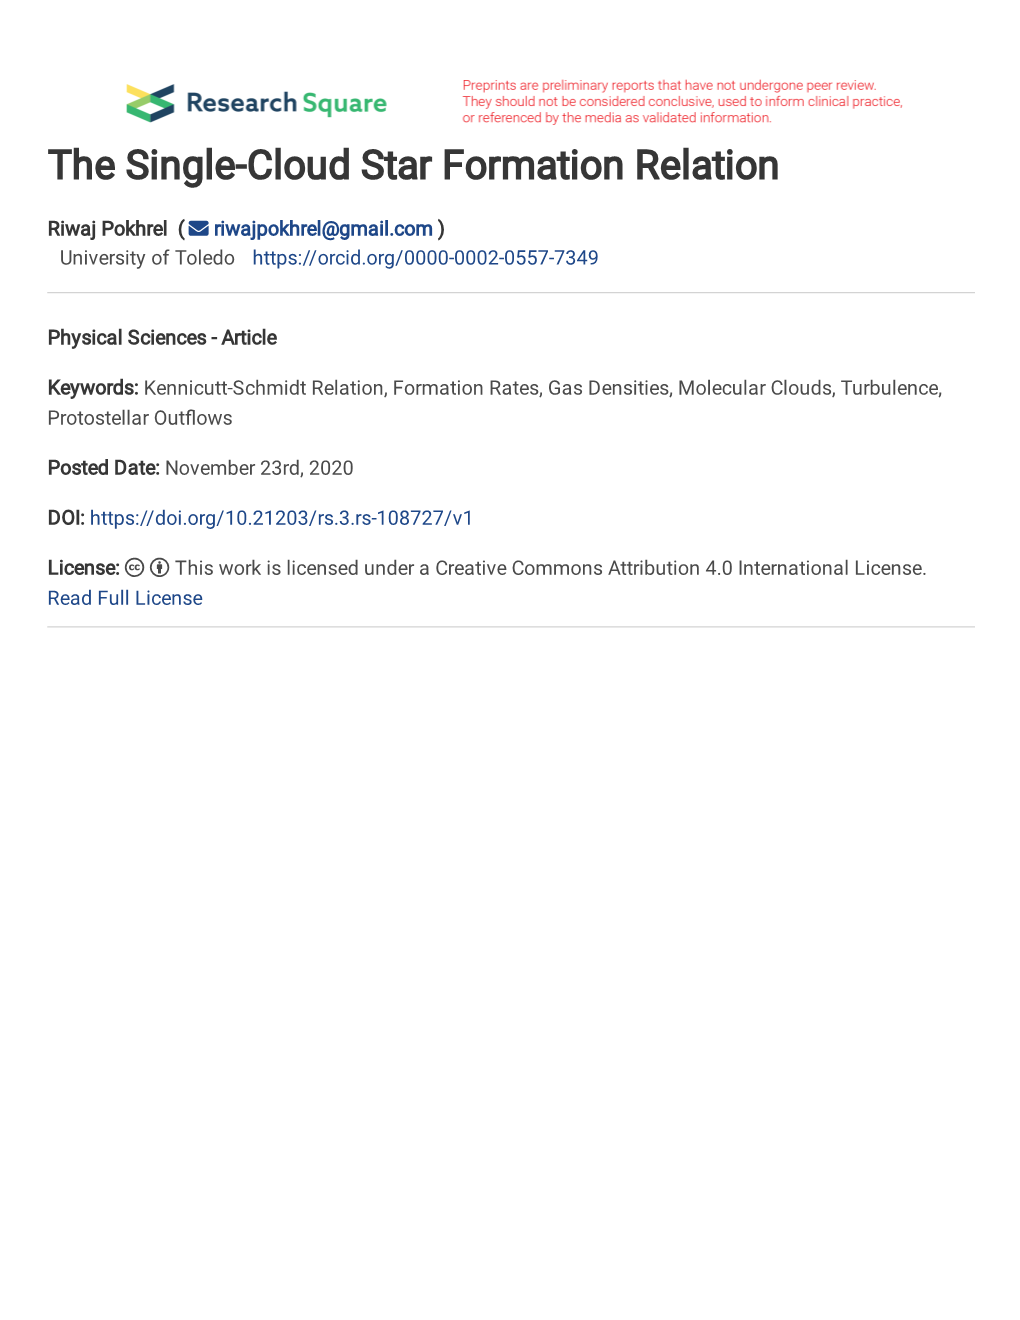 The Single-Cloud Star Formation Relation